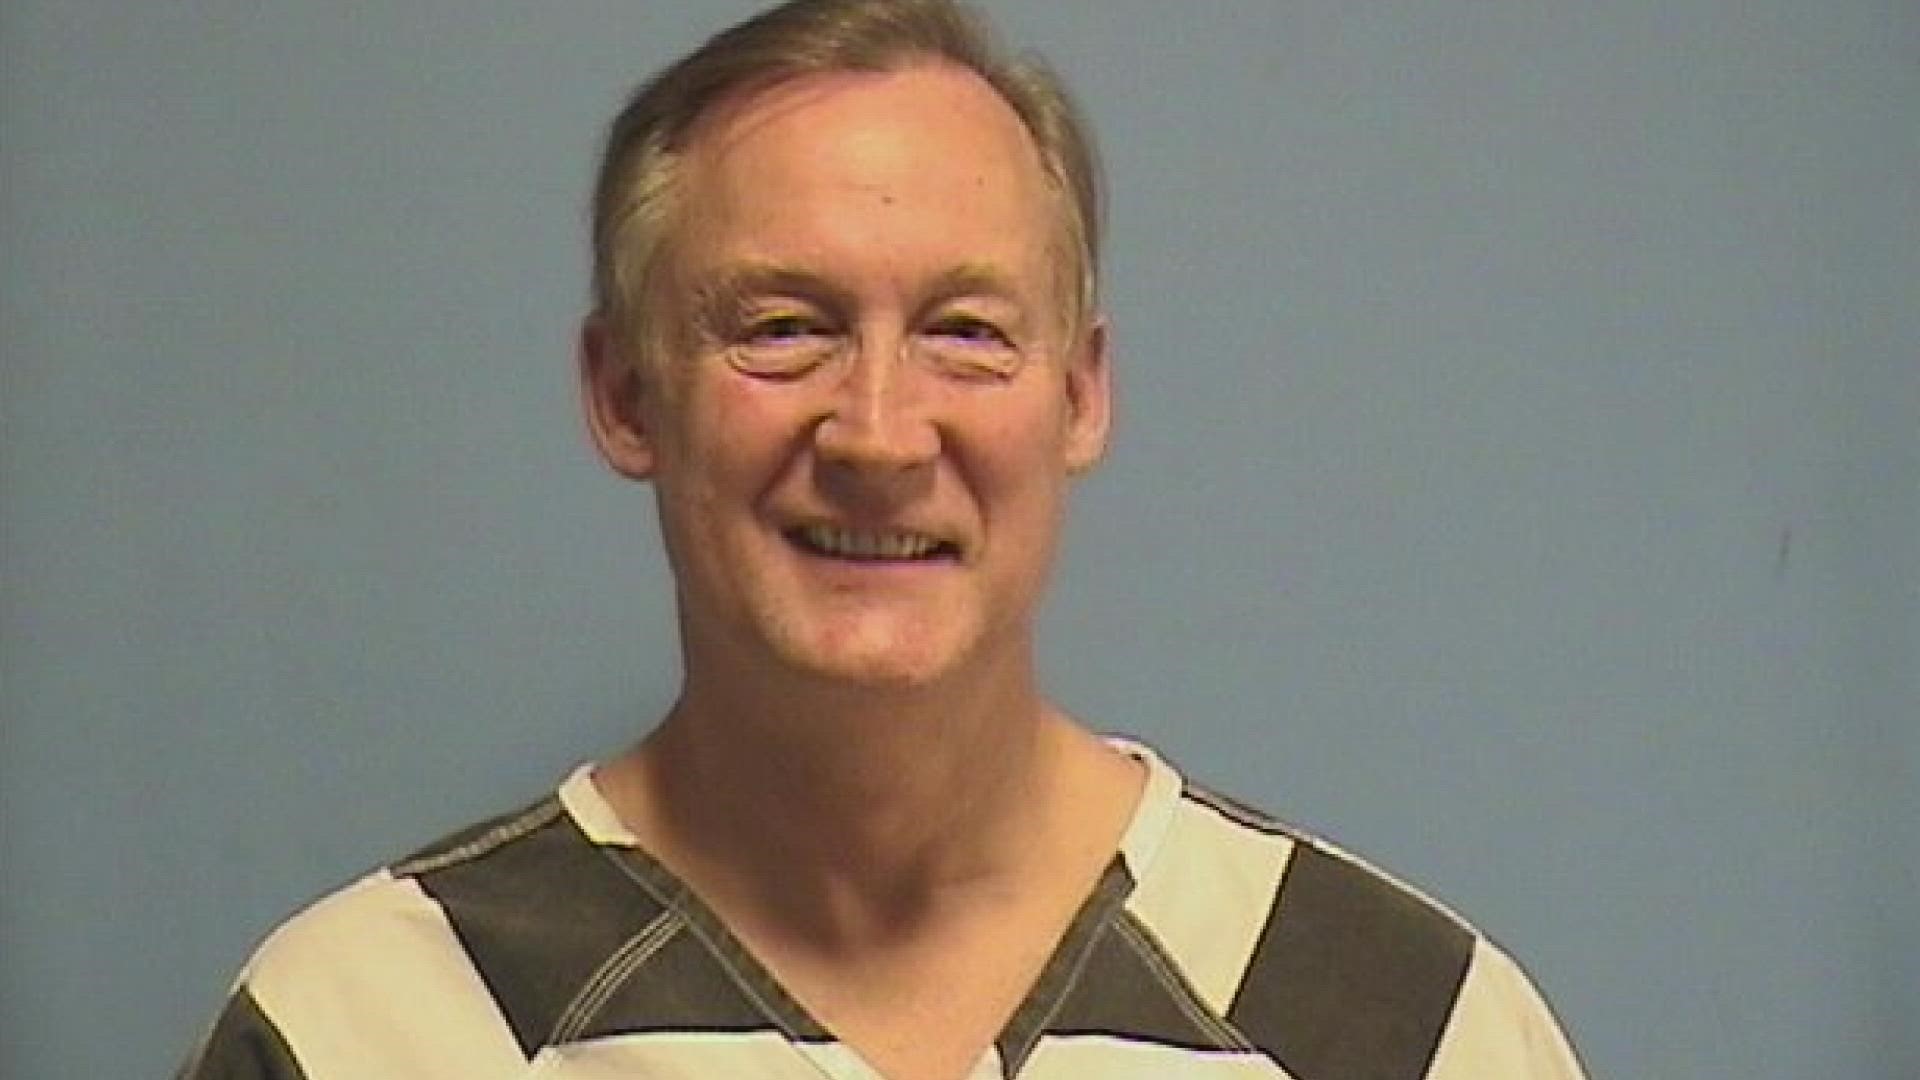 After taping his students' mouths shut, a Slidell headmaster was arrested but bonded out after.